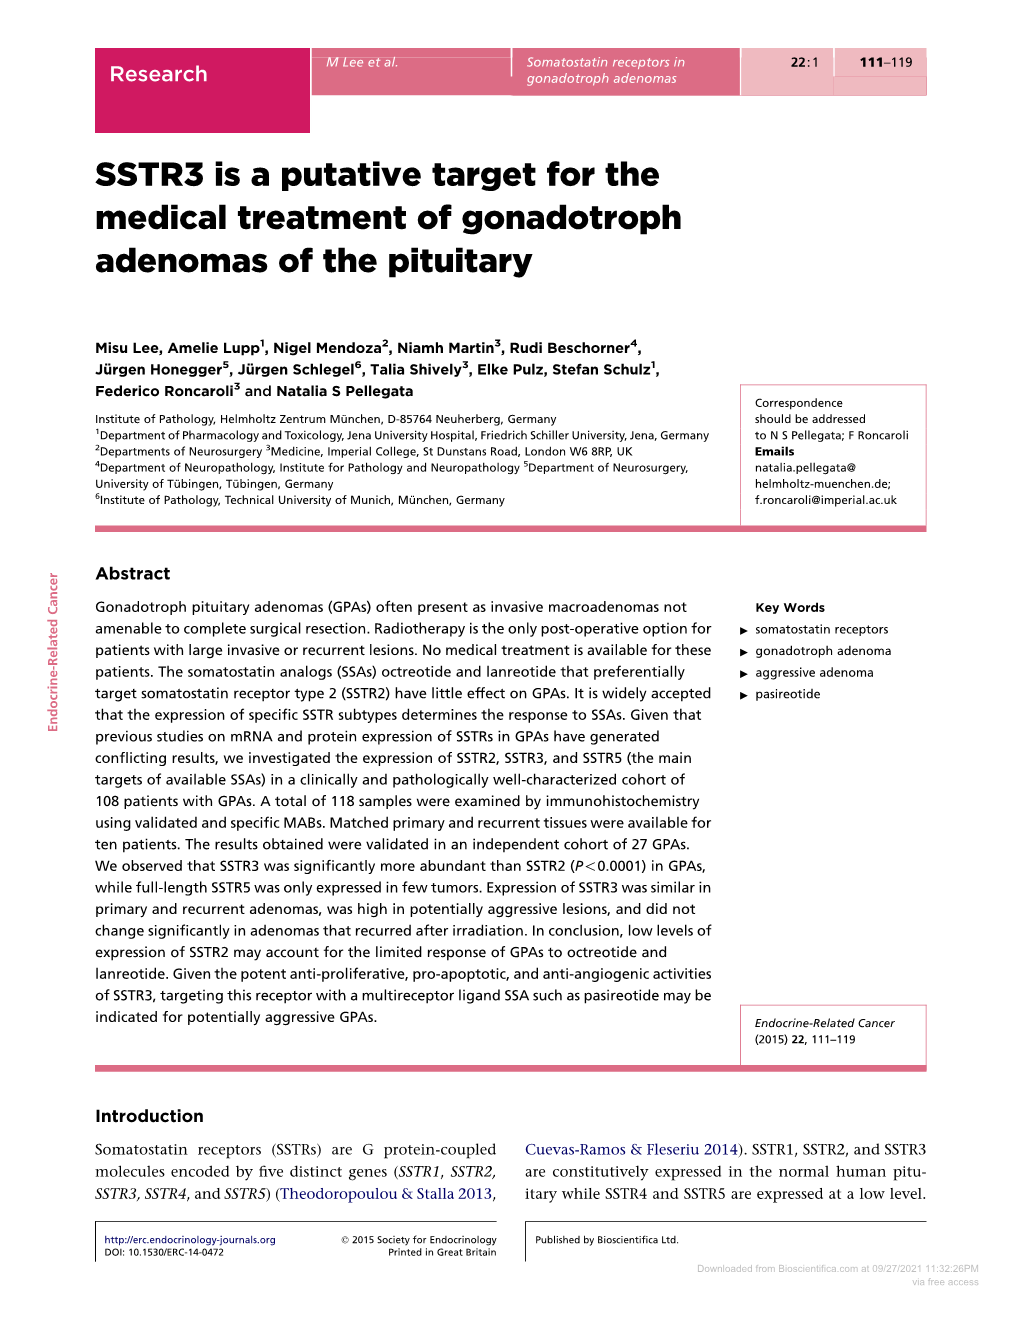 SSTR3 Is a Putative Target for the Medical Treatment of Gonadotroph Adenomas of the Pituitary